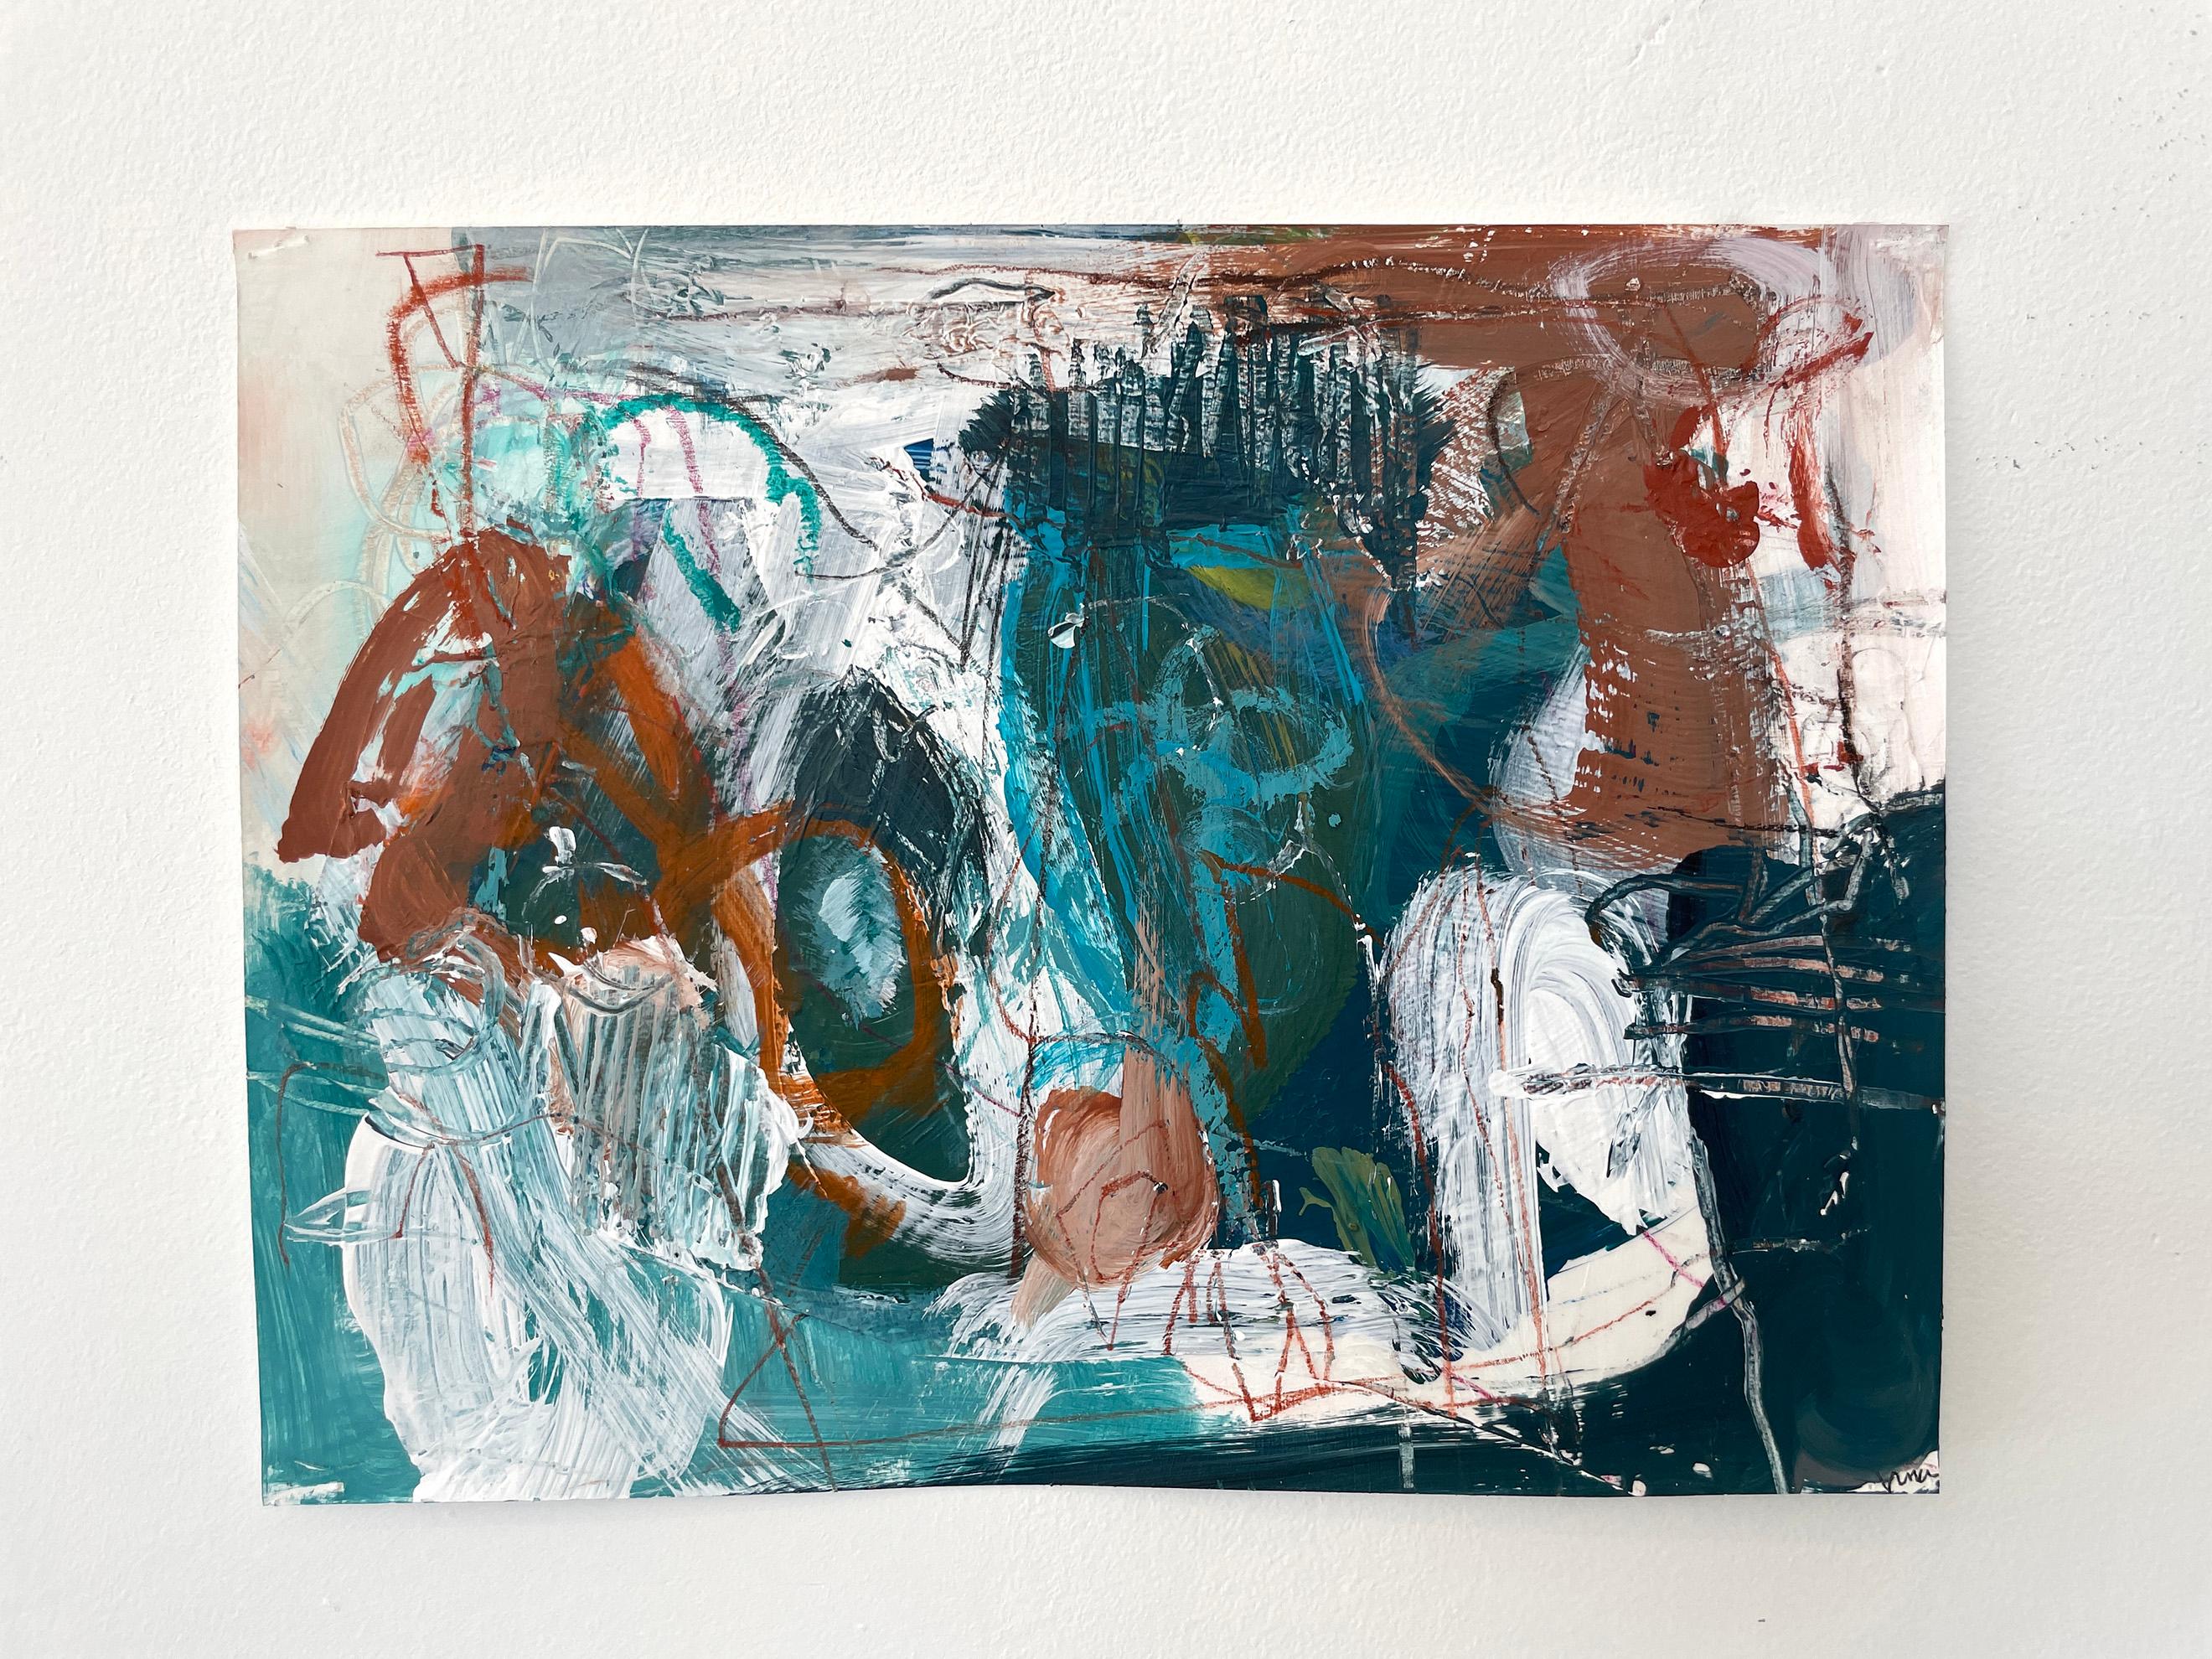 Small Works on Paper, Untitled #17 - Painting by Stephanie Visser 